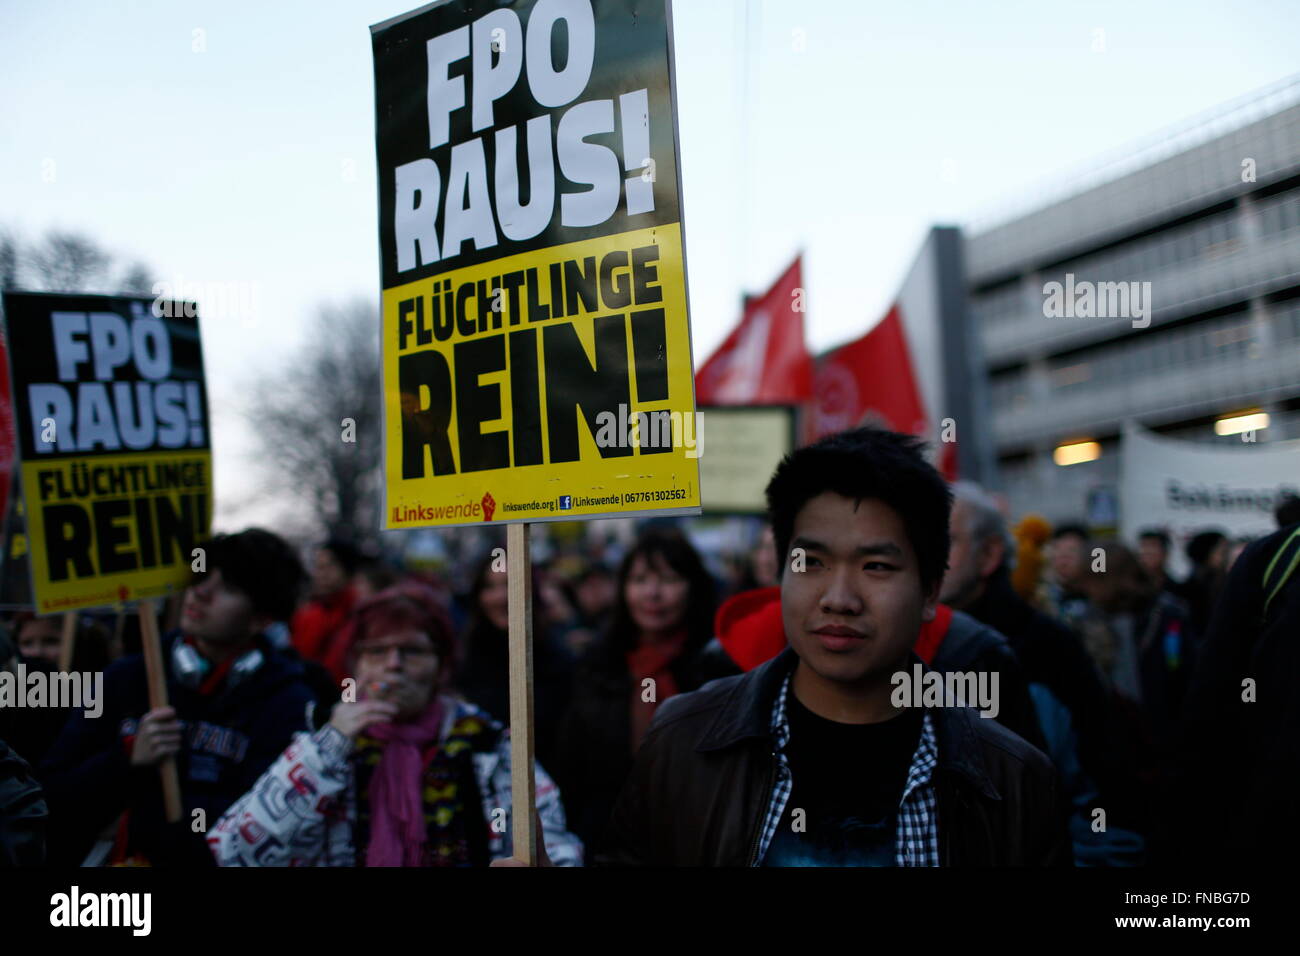 Vienna, Austria. 14th March, 2016. Demonstrators protest a rally being held by the far-right Freedom Party of Austria (FPÖ) in the Liesing suburb of Vienna, Austria. Liesing is the site of a refugee housing centre, drawing anger from supporters of the anti-immigrant FPÖ. Credit:  David Cliff/Alamy Live News Stock Photo